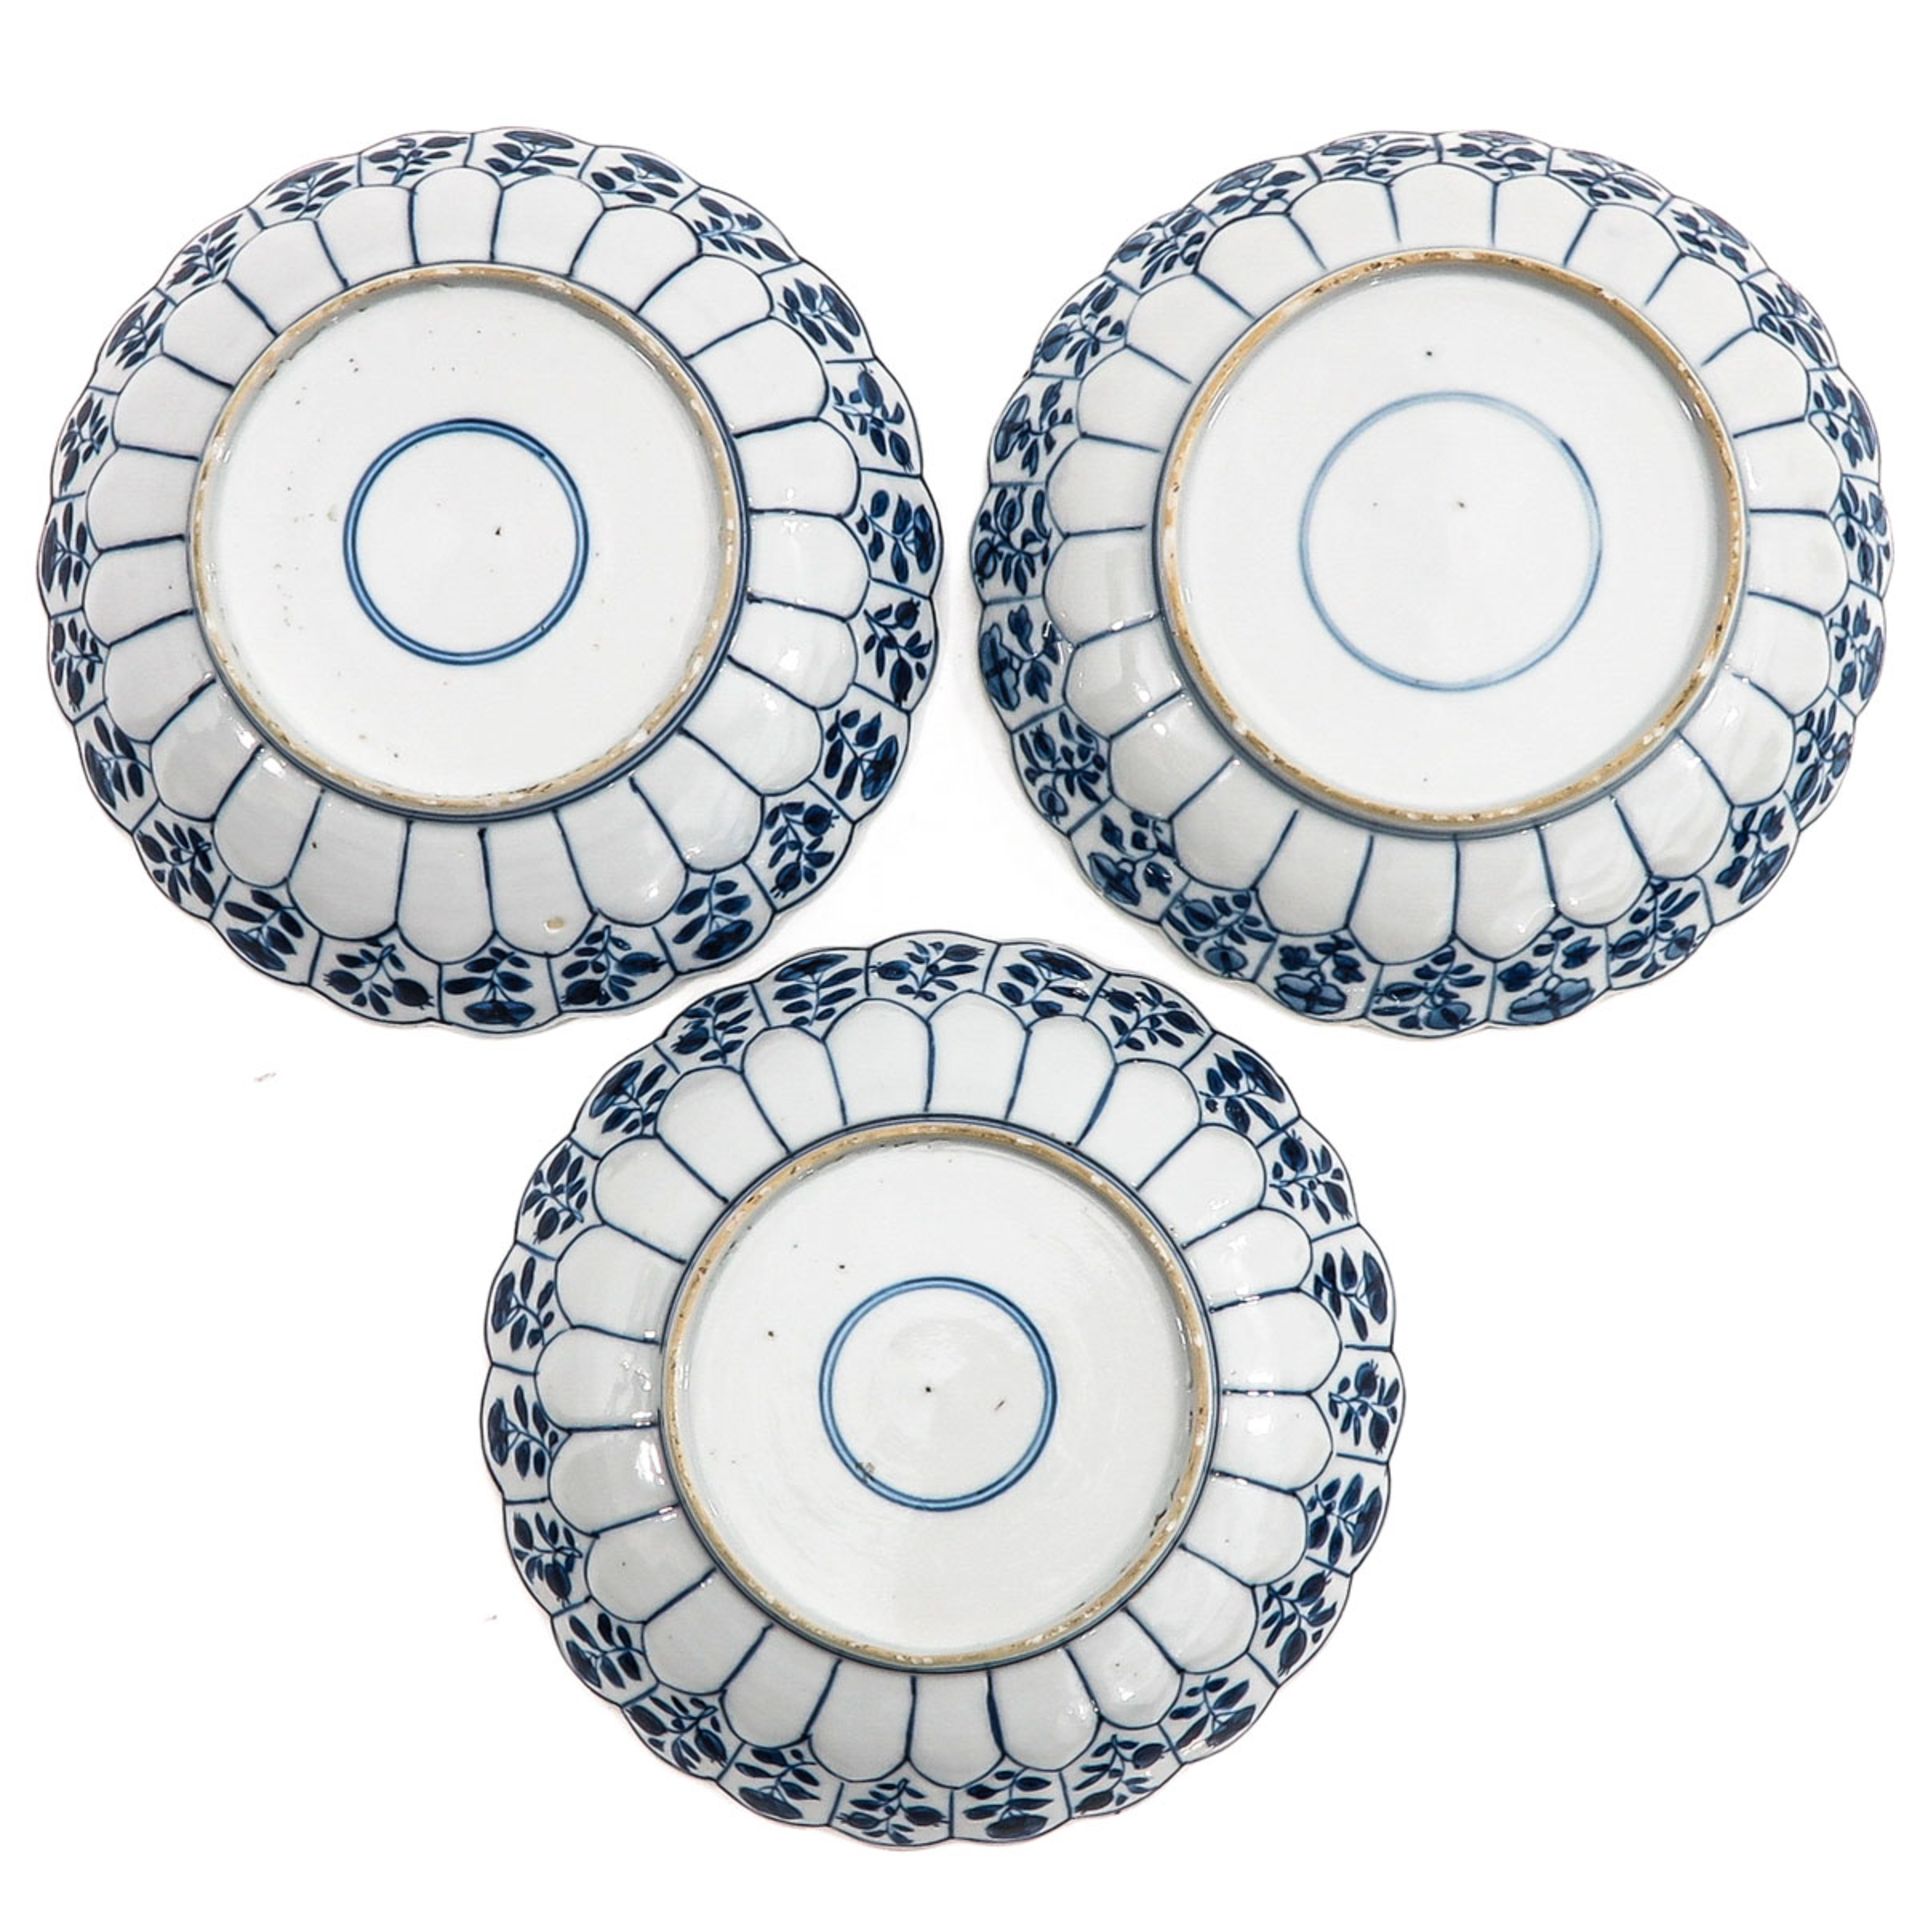 A Series of 3 Blue and White Plates - Image 2 of 10